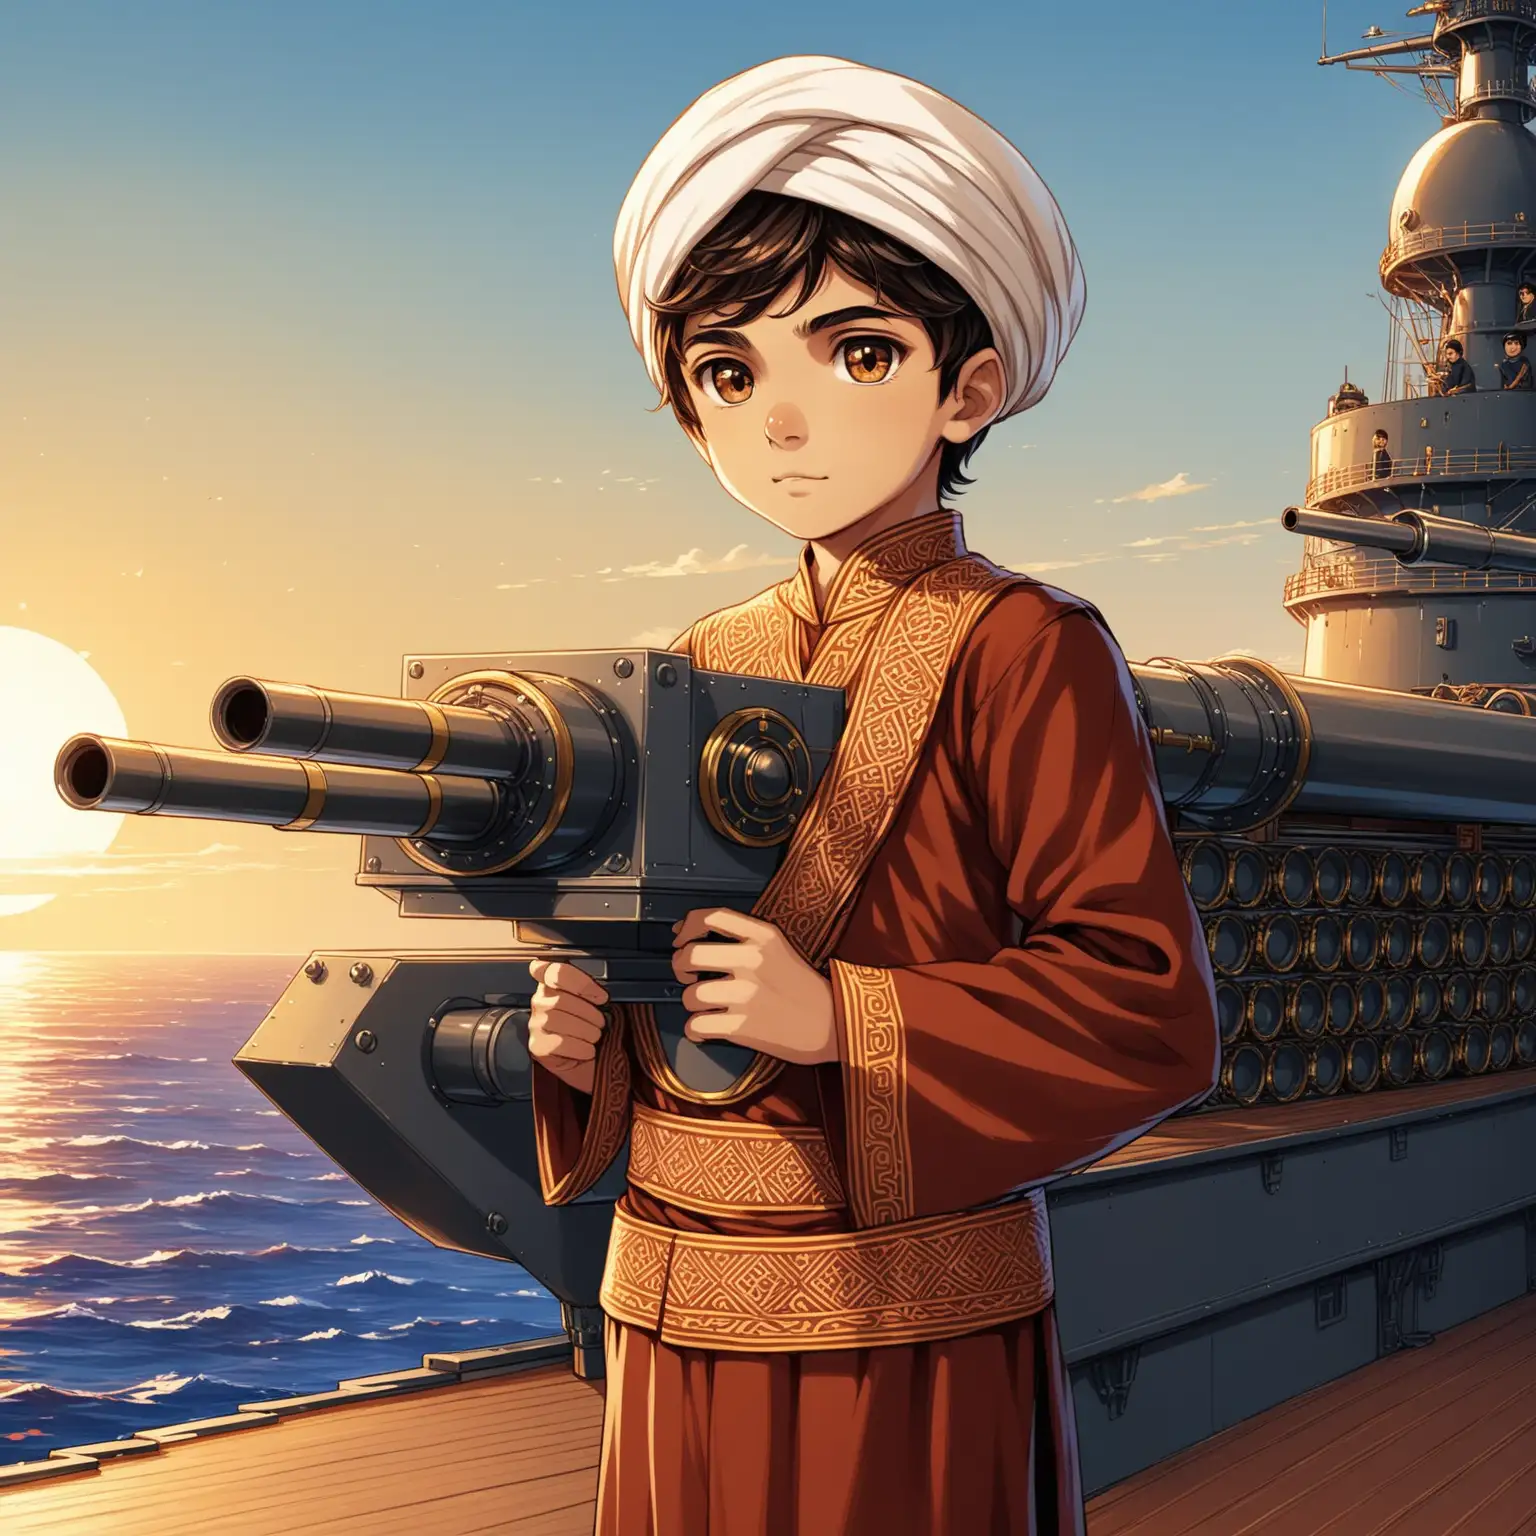 10 years old warrior Persian boy, on the IRIS Deylaman warship's deck, using anti-aircraft cannon, clothes full of Persian designs, smaller eyes, bigger nose, white skin, brown eyes.